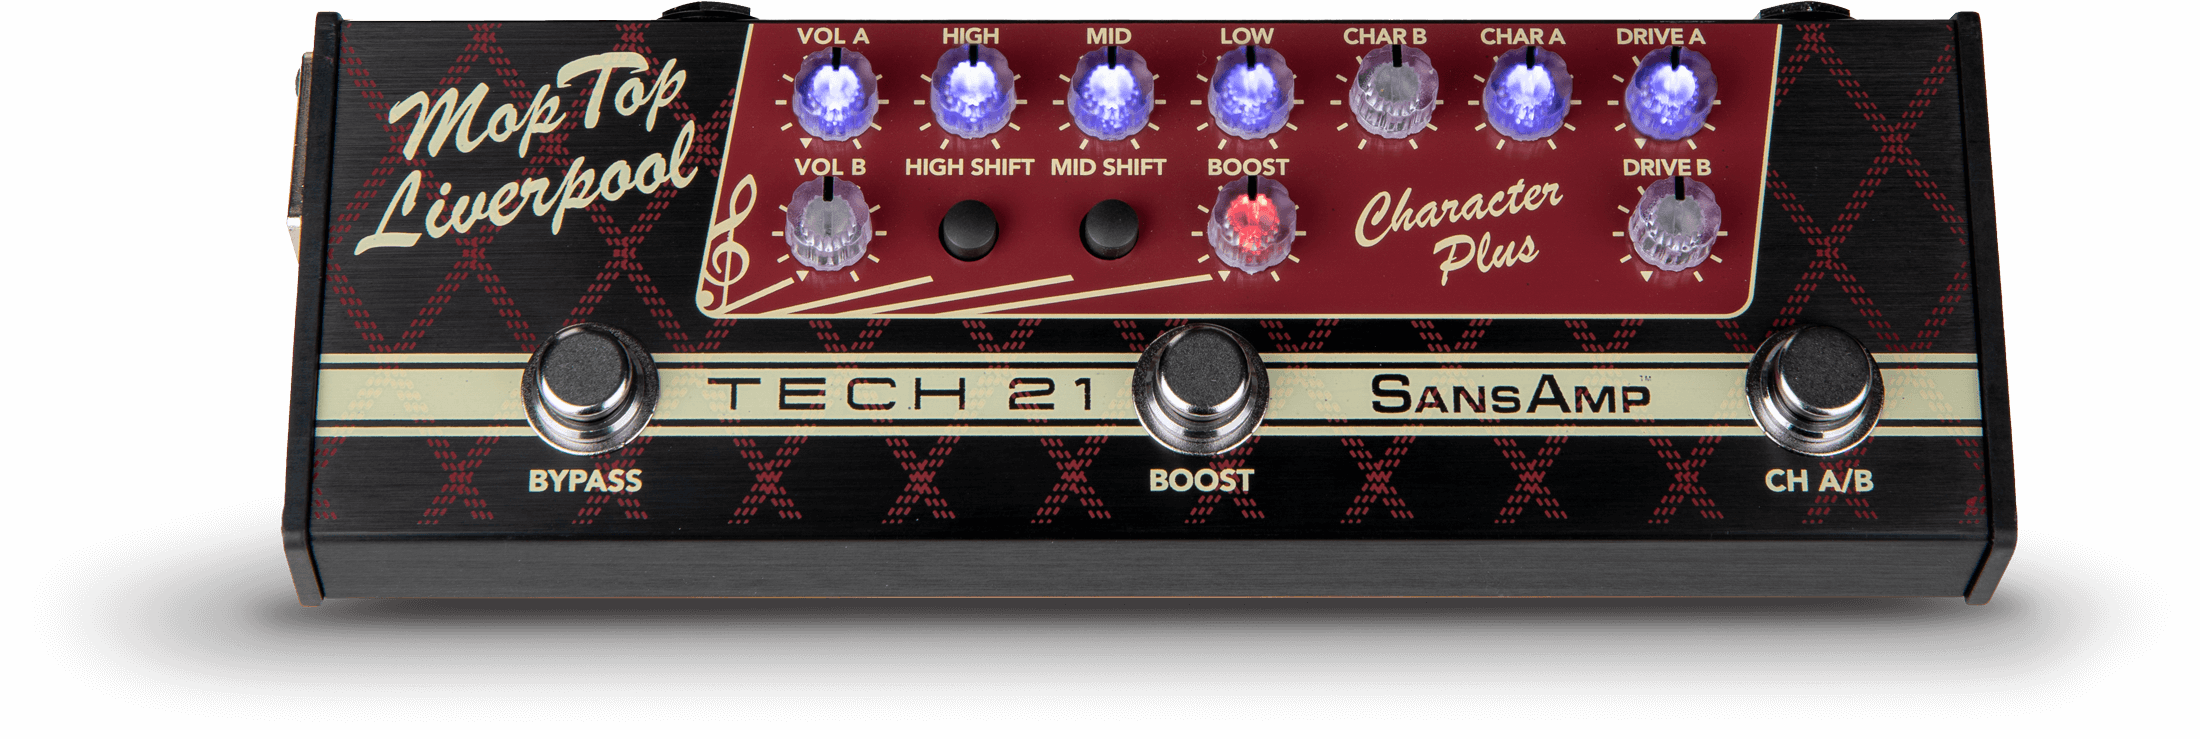 Tech 21 product image of the Mop Top Liverpool pedal from the SansAmp Character Plus Series